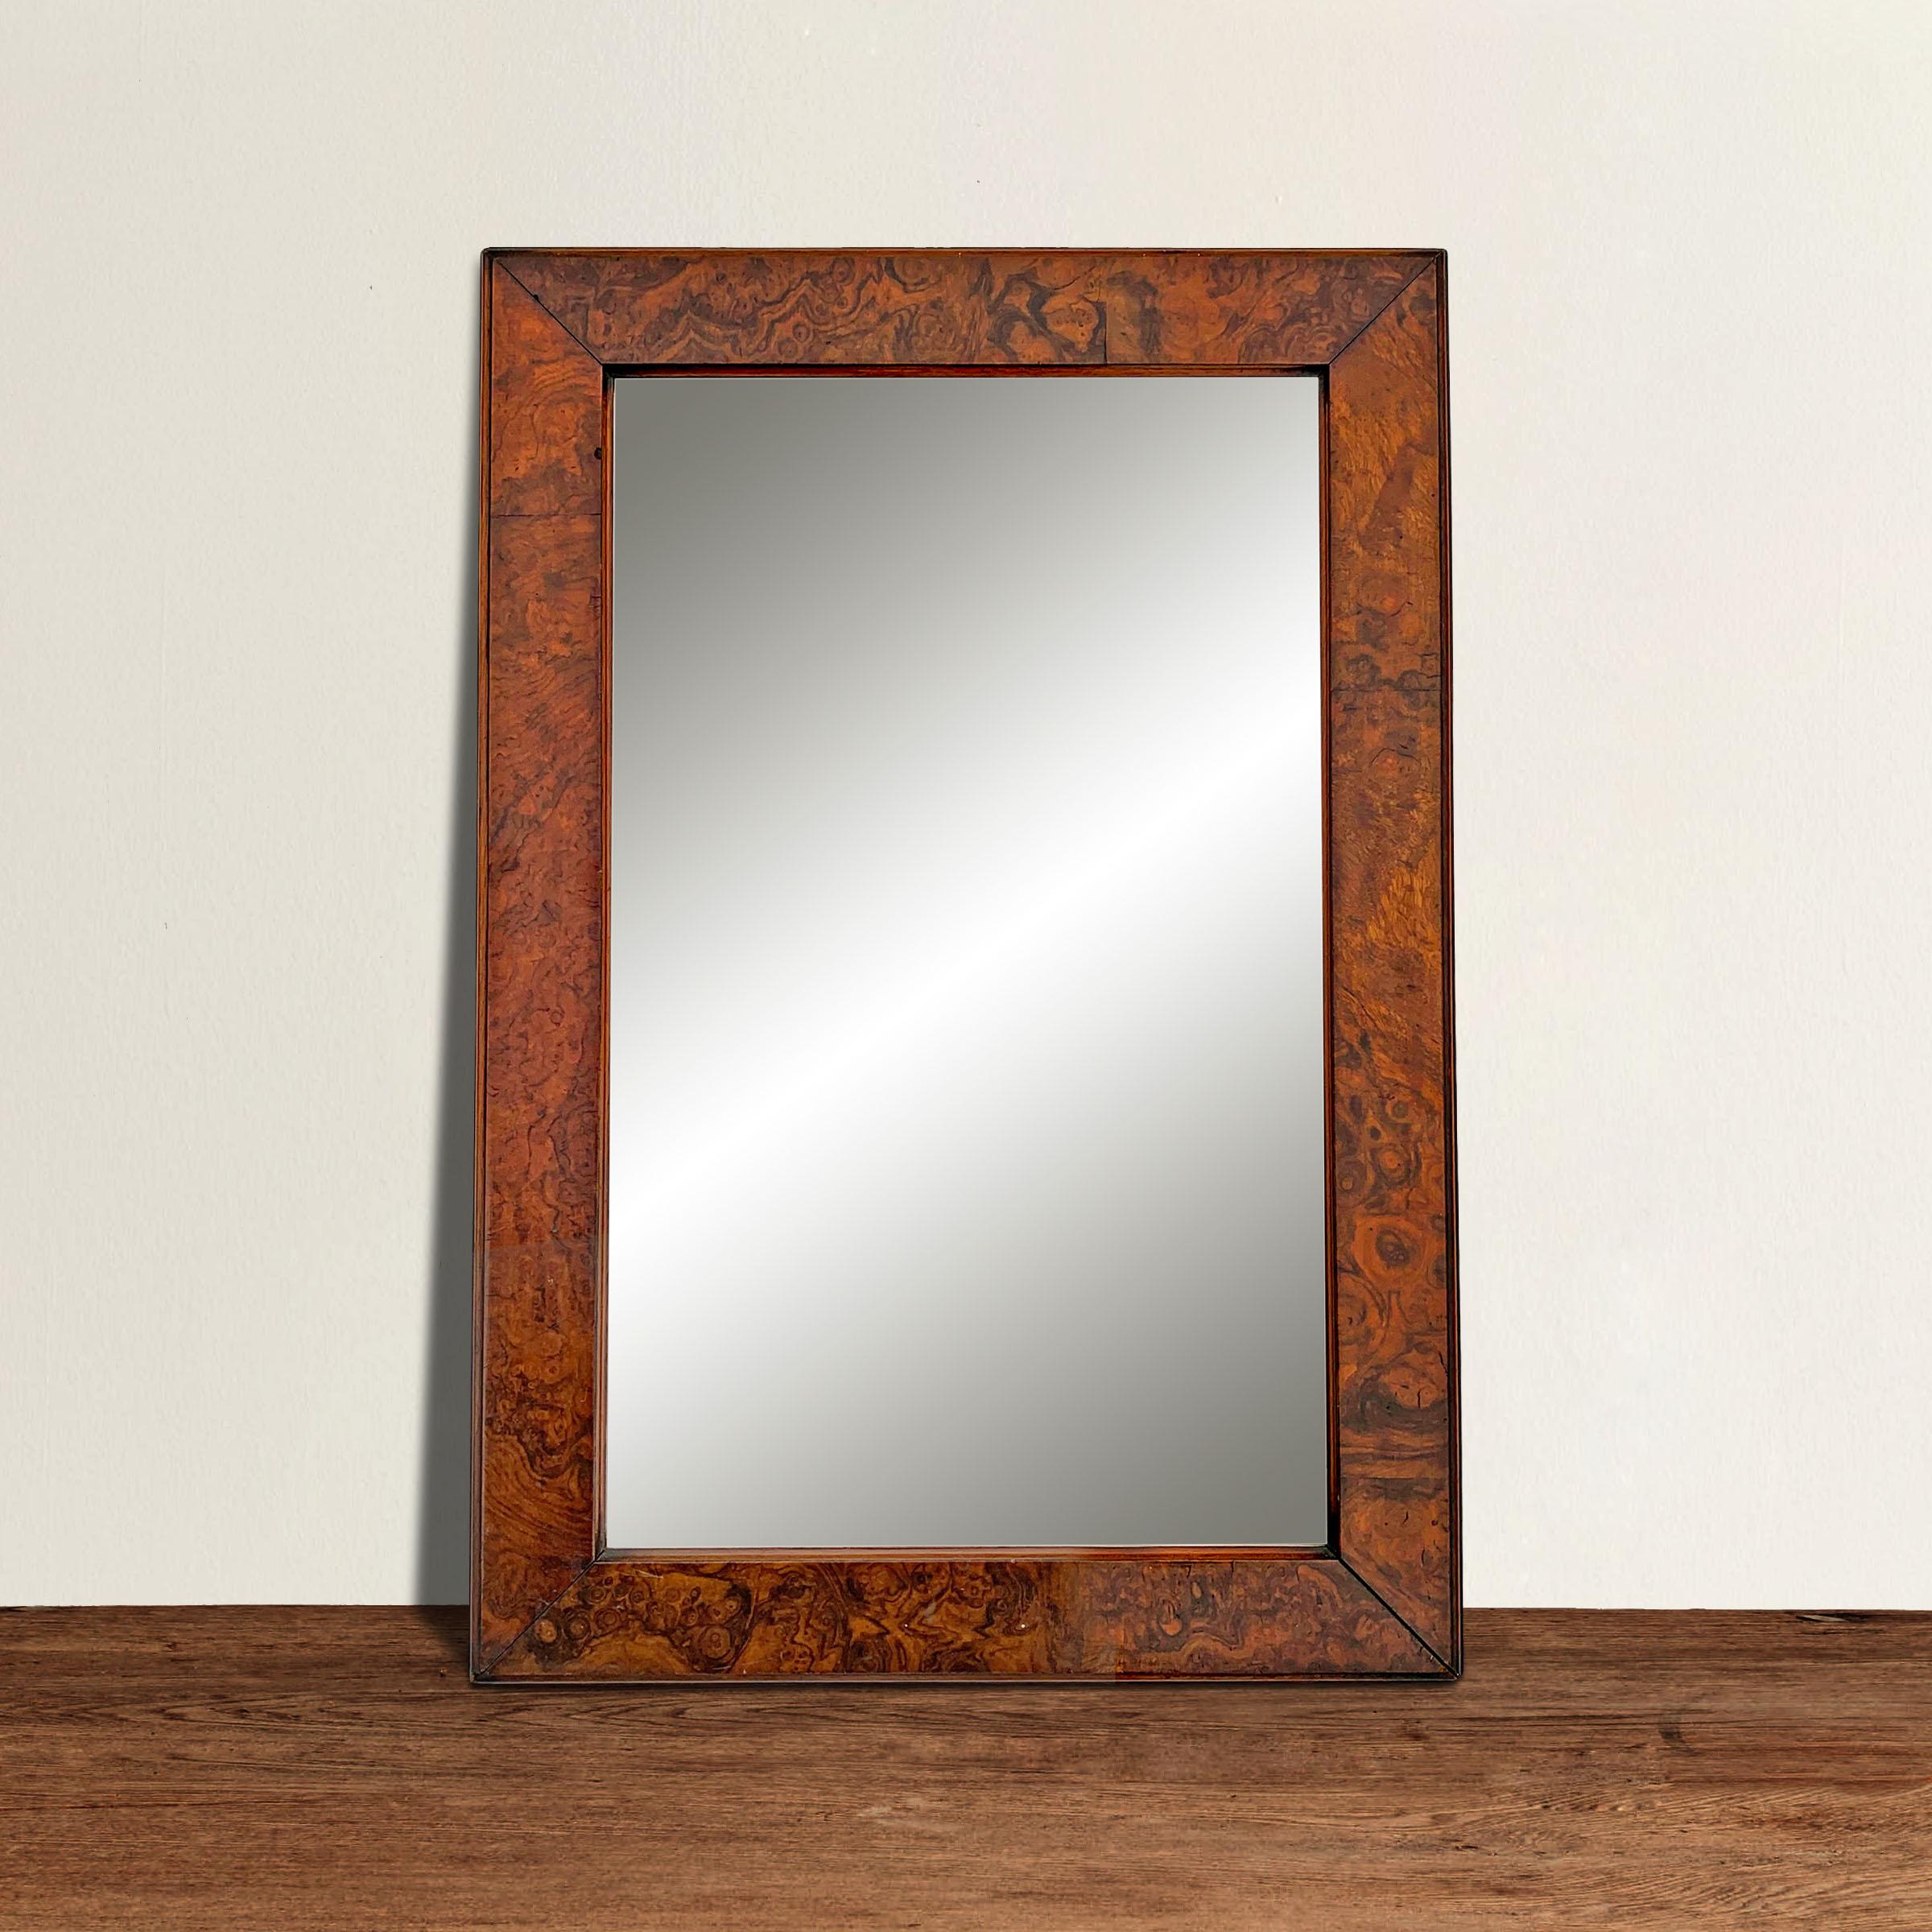 A wonderful 19th century American burl wood framed mirror with a fantastic rich active woodgrain pattern. Can be hung vertically or horizontally.